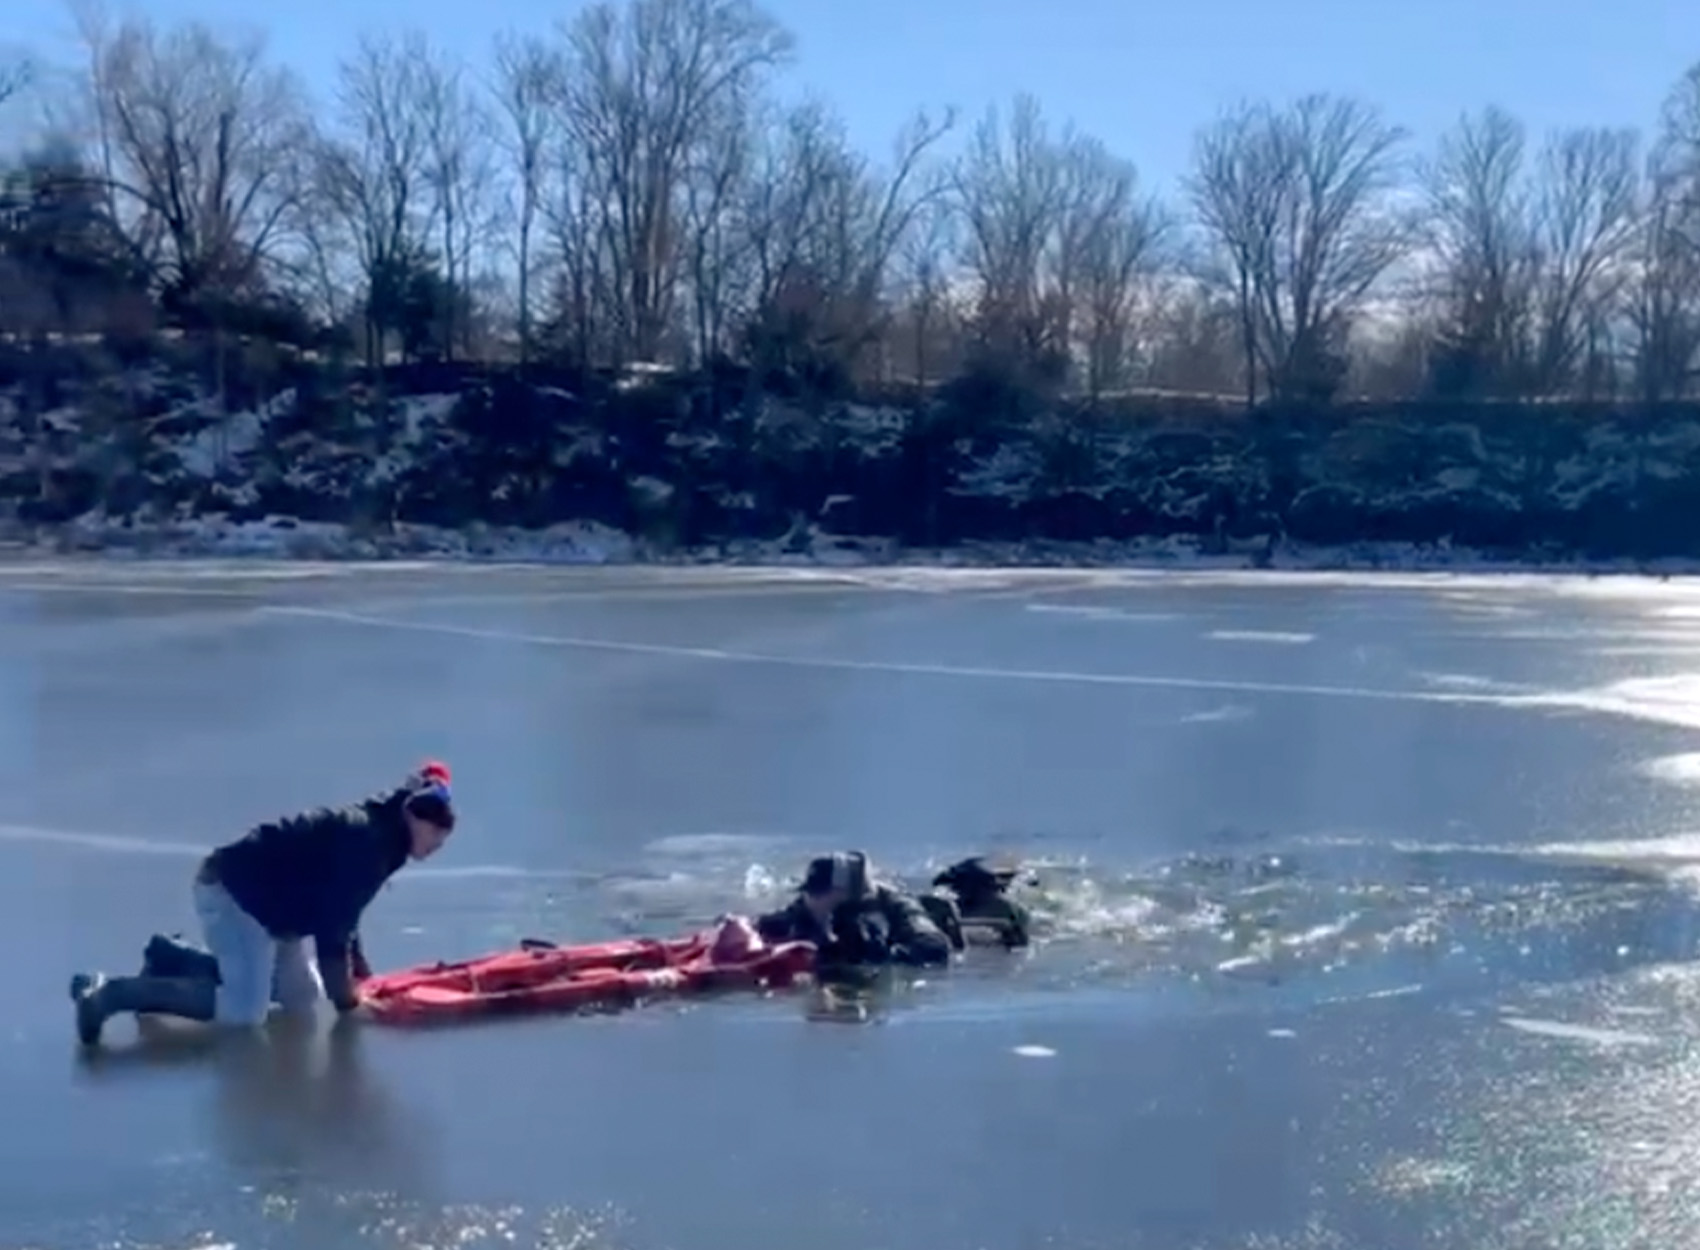 An ice fisherman rescues a fellow angler using a tent bag.